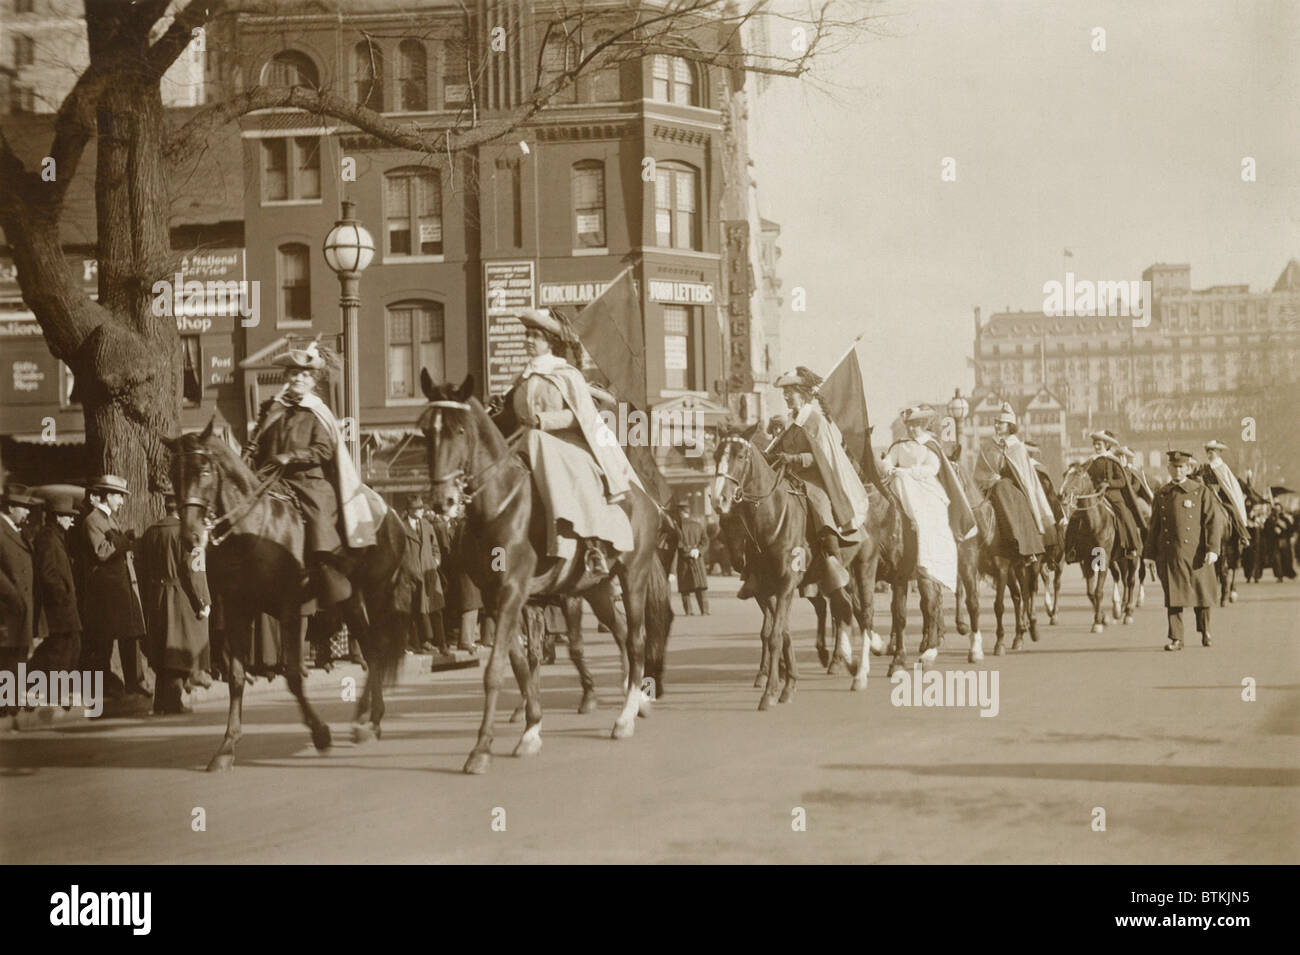 Suffragists on horseback in a parade in Washington, D.C. on May 9, 1914. Stock Photo